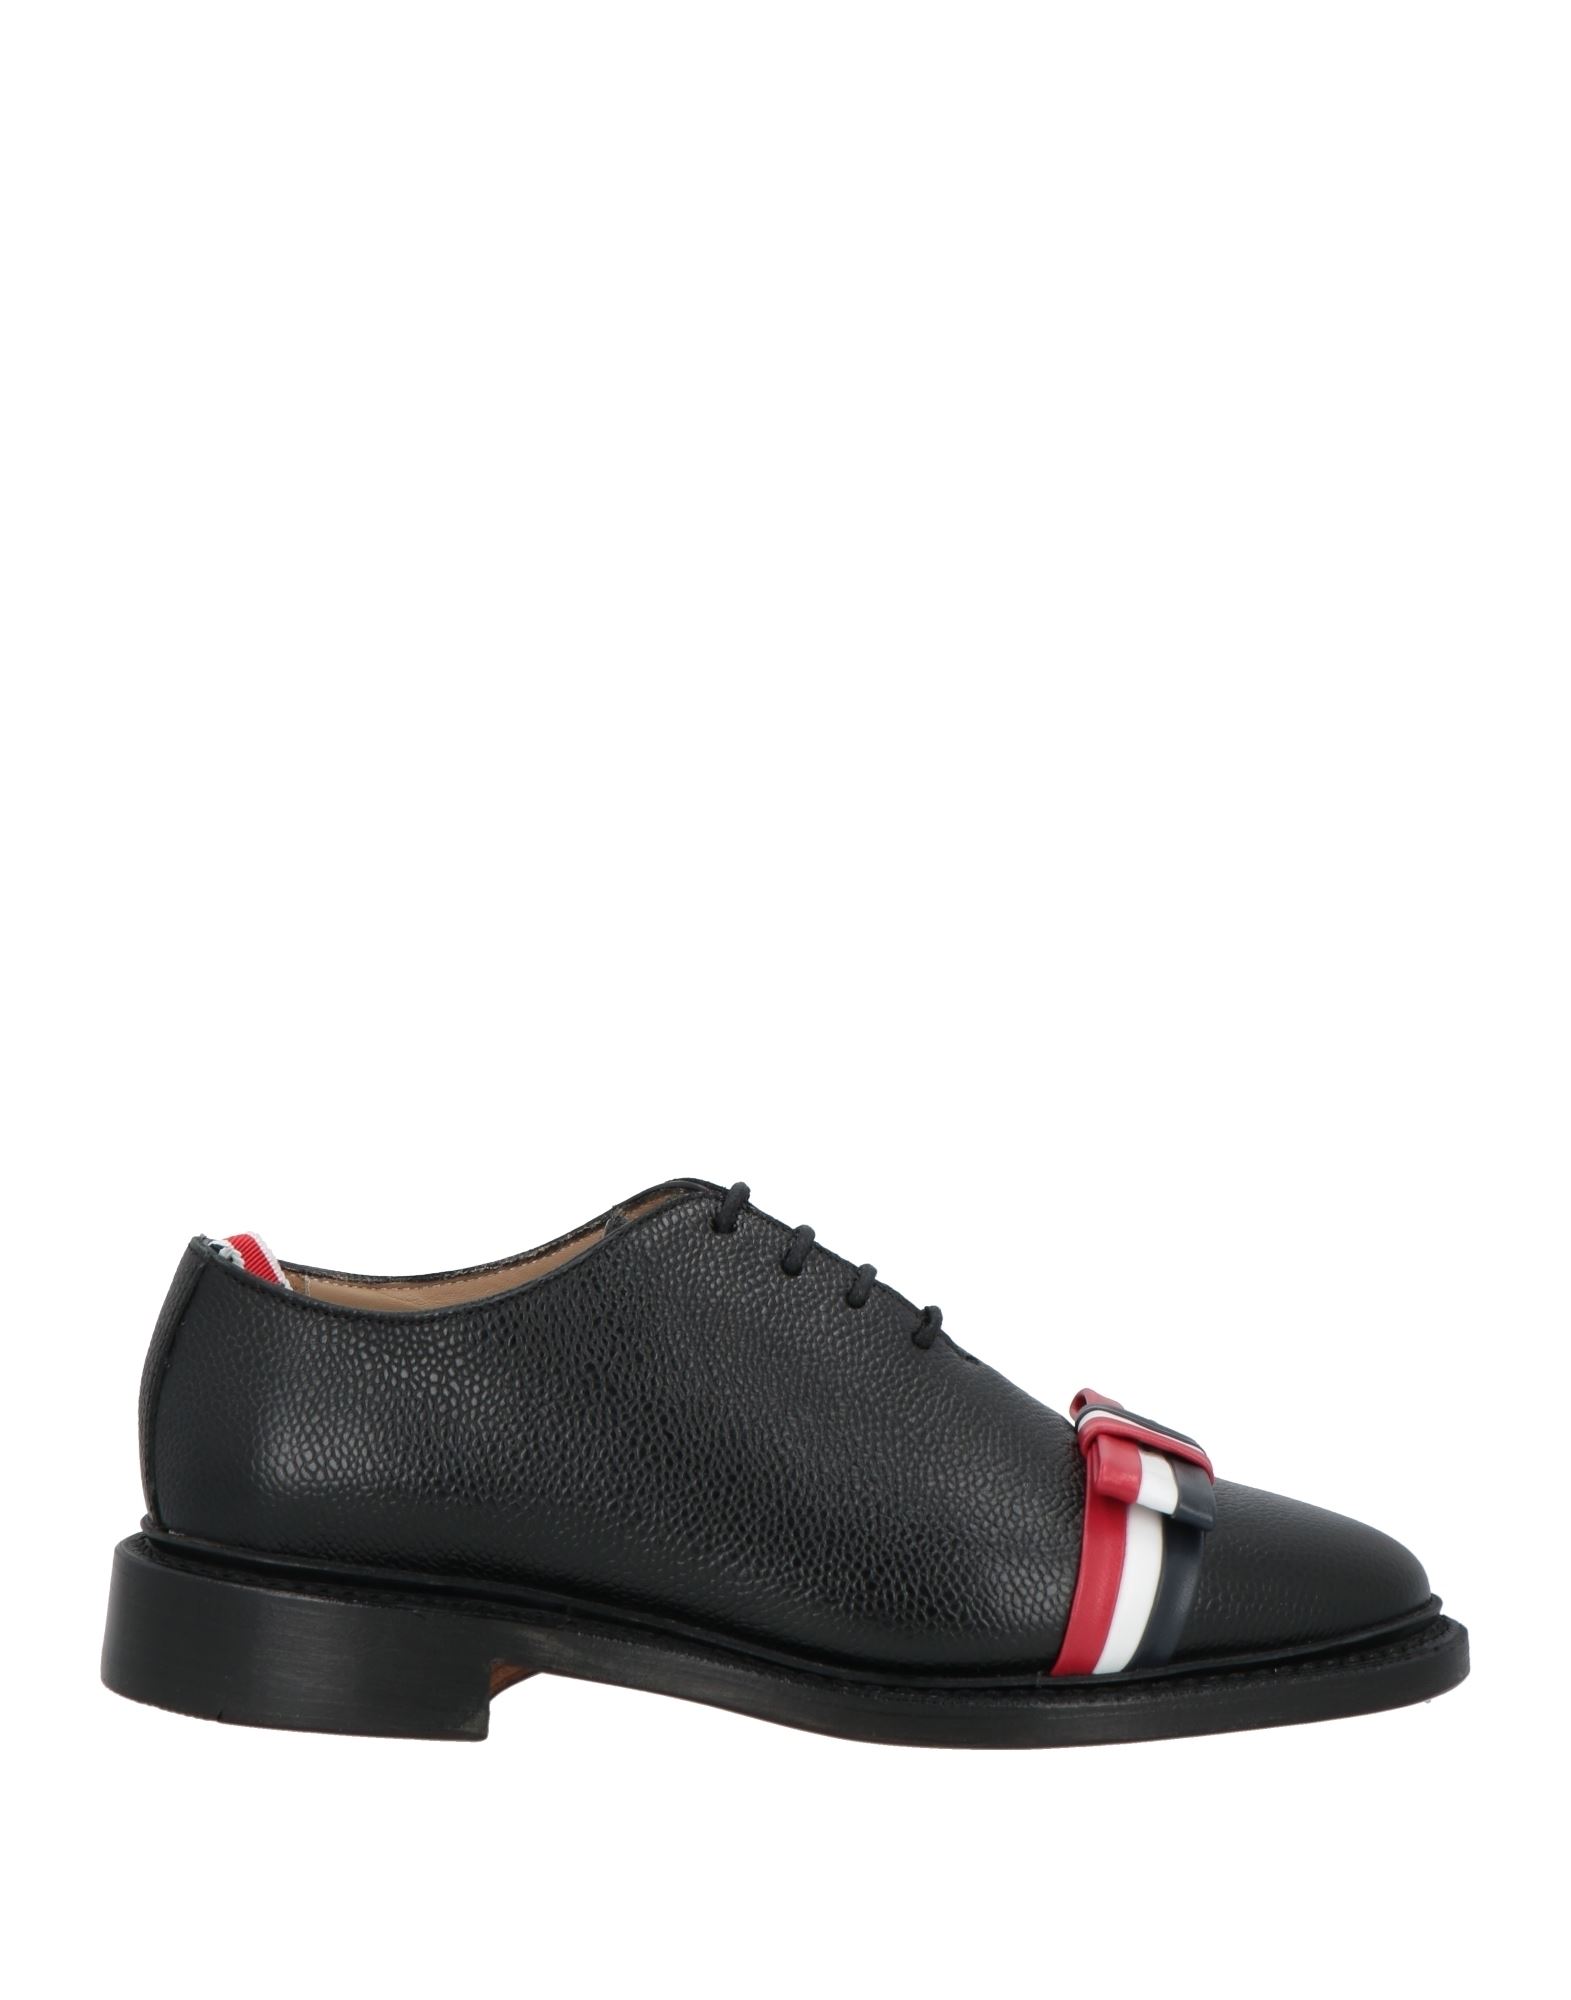 THOM BROWNE THOM BROWNE WOMAN LACE-UP SHOES BLACK SIZE 6 LEATHER,11256260XB 13